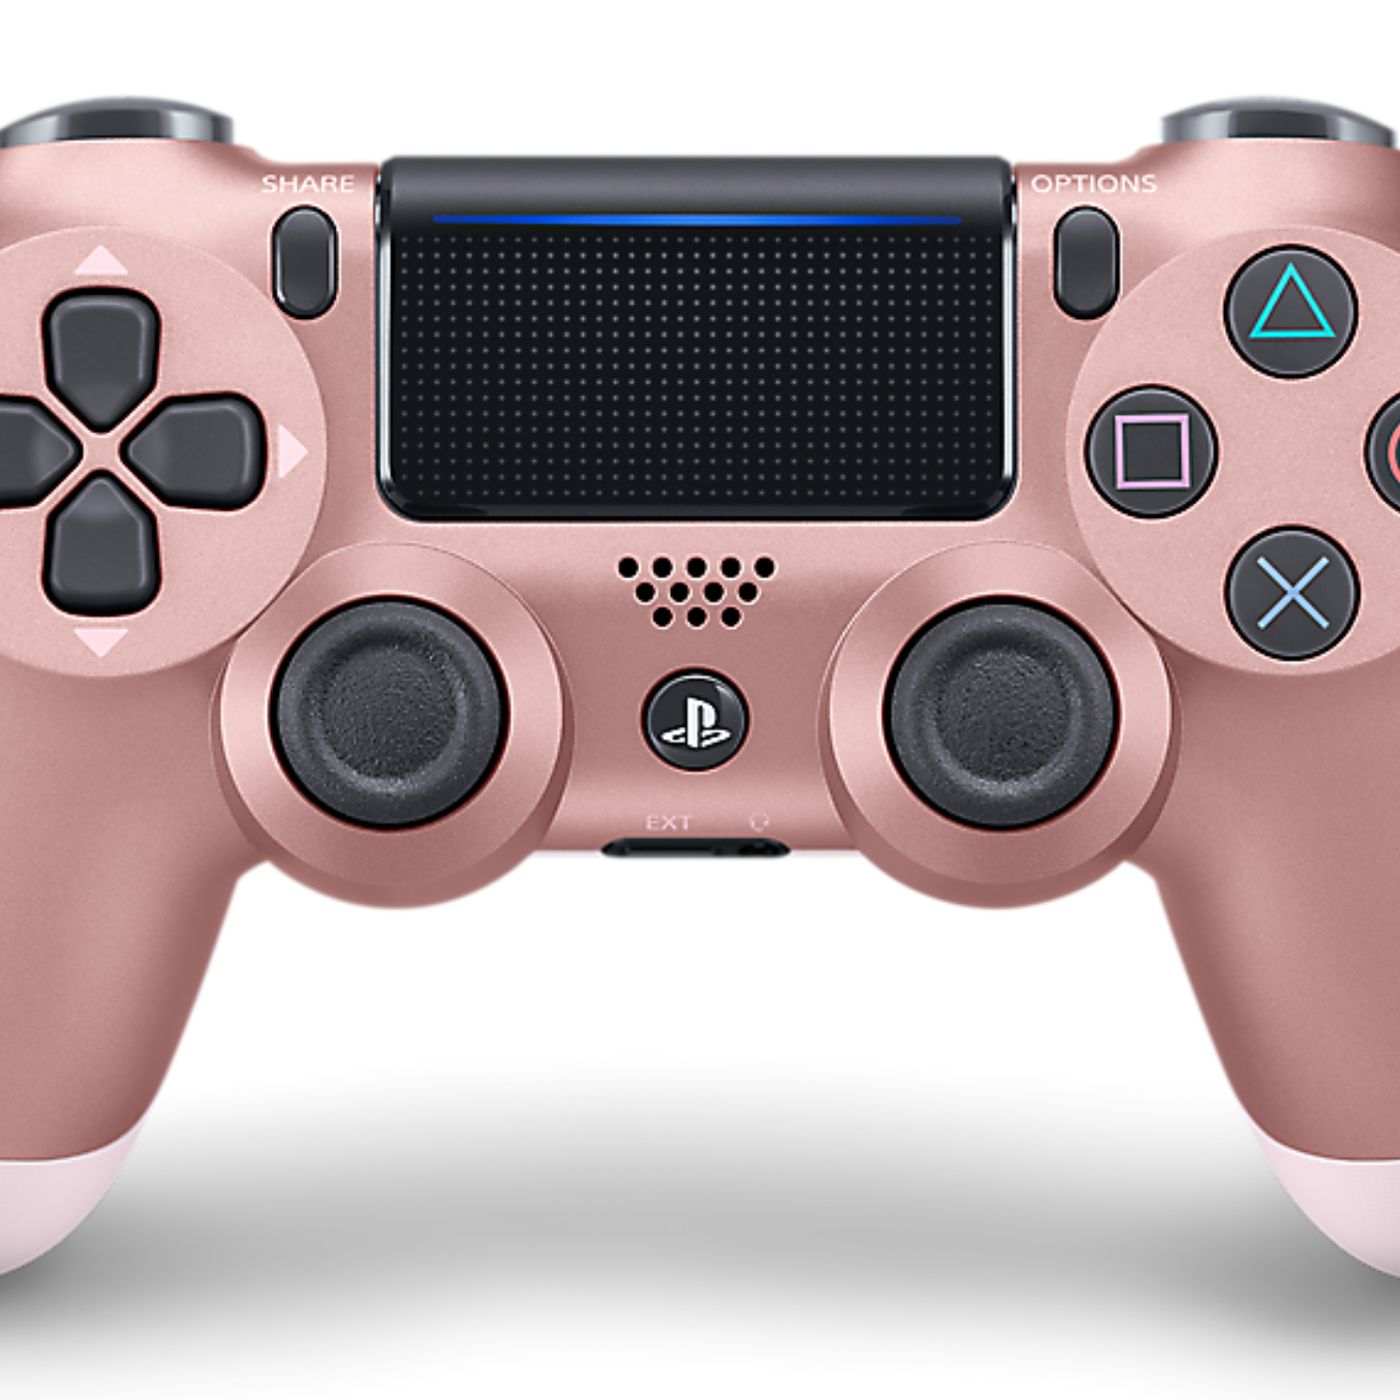 Sony S Brilliant Rose Gold Colored Ps4 Controller Is 20 Off At